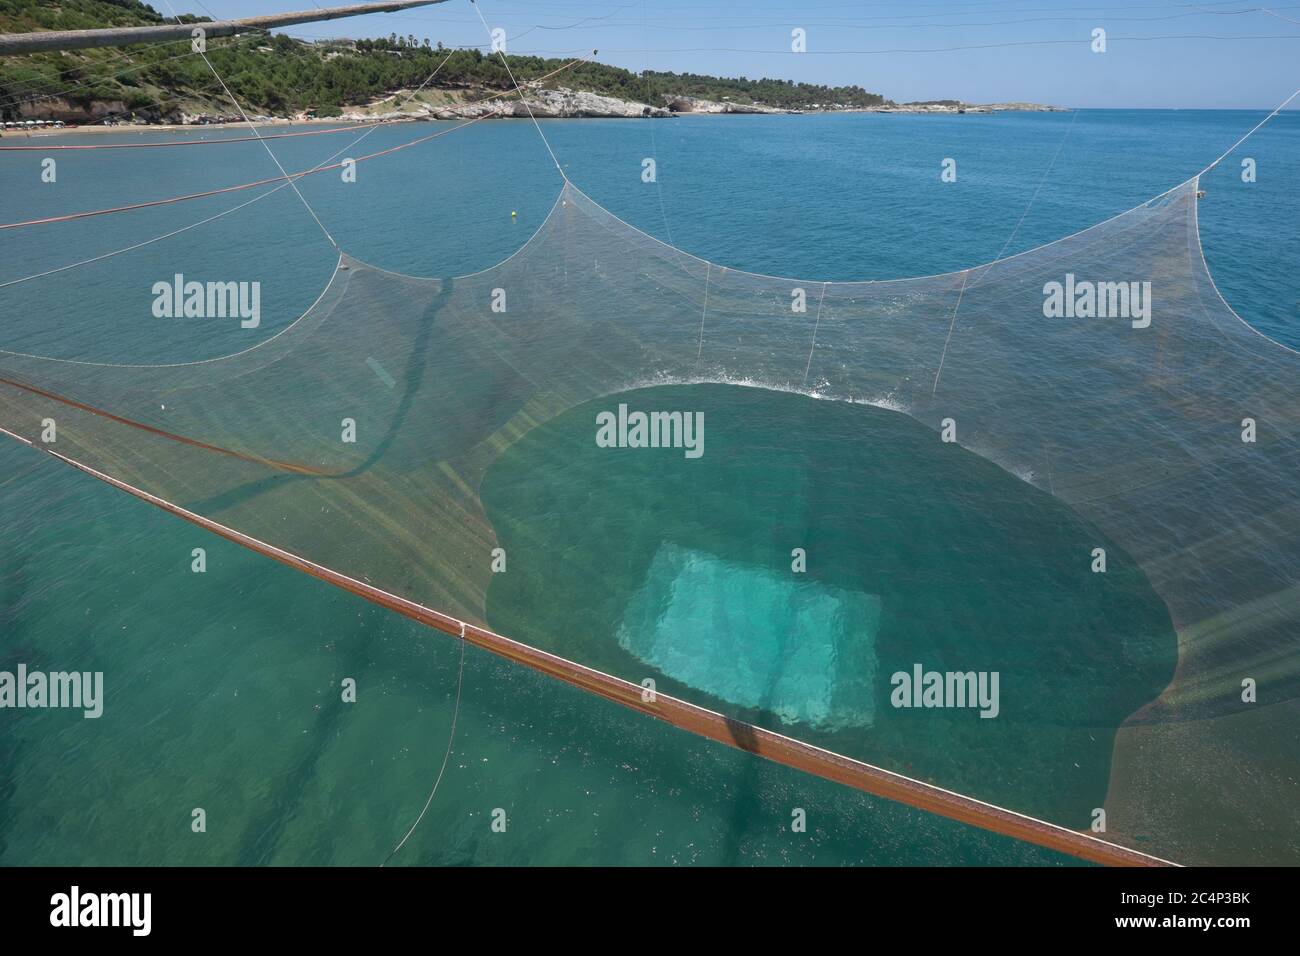 Huge fishing net is pulled up by ropes in a traditional fishing